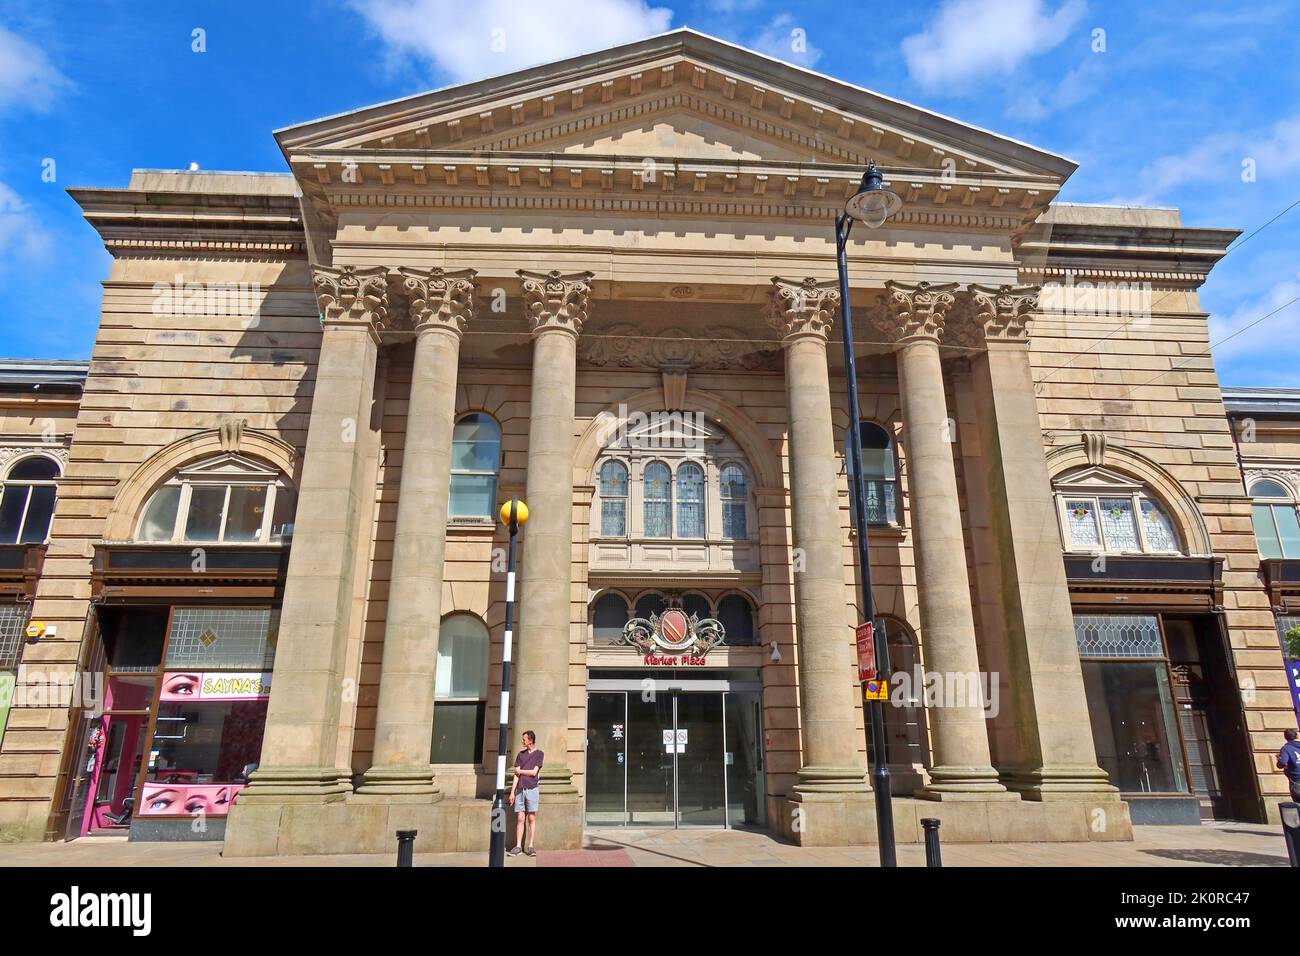 Historic exterior of Bolton Market Place shopping Centre, Knowsley St, Bolton, Greater Manchester, Lancs, England, UK, BL1 2AL Stock Photo